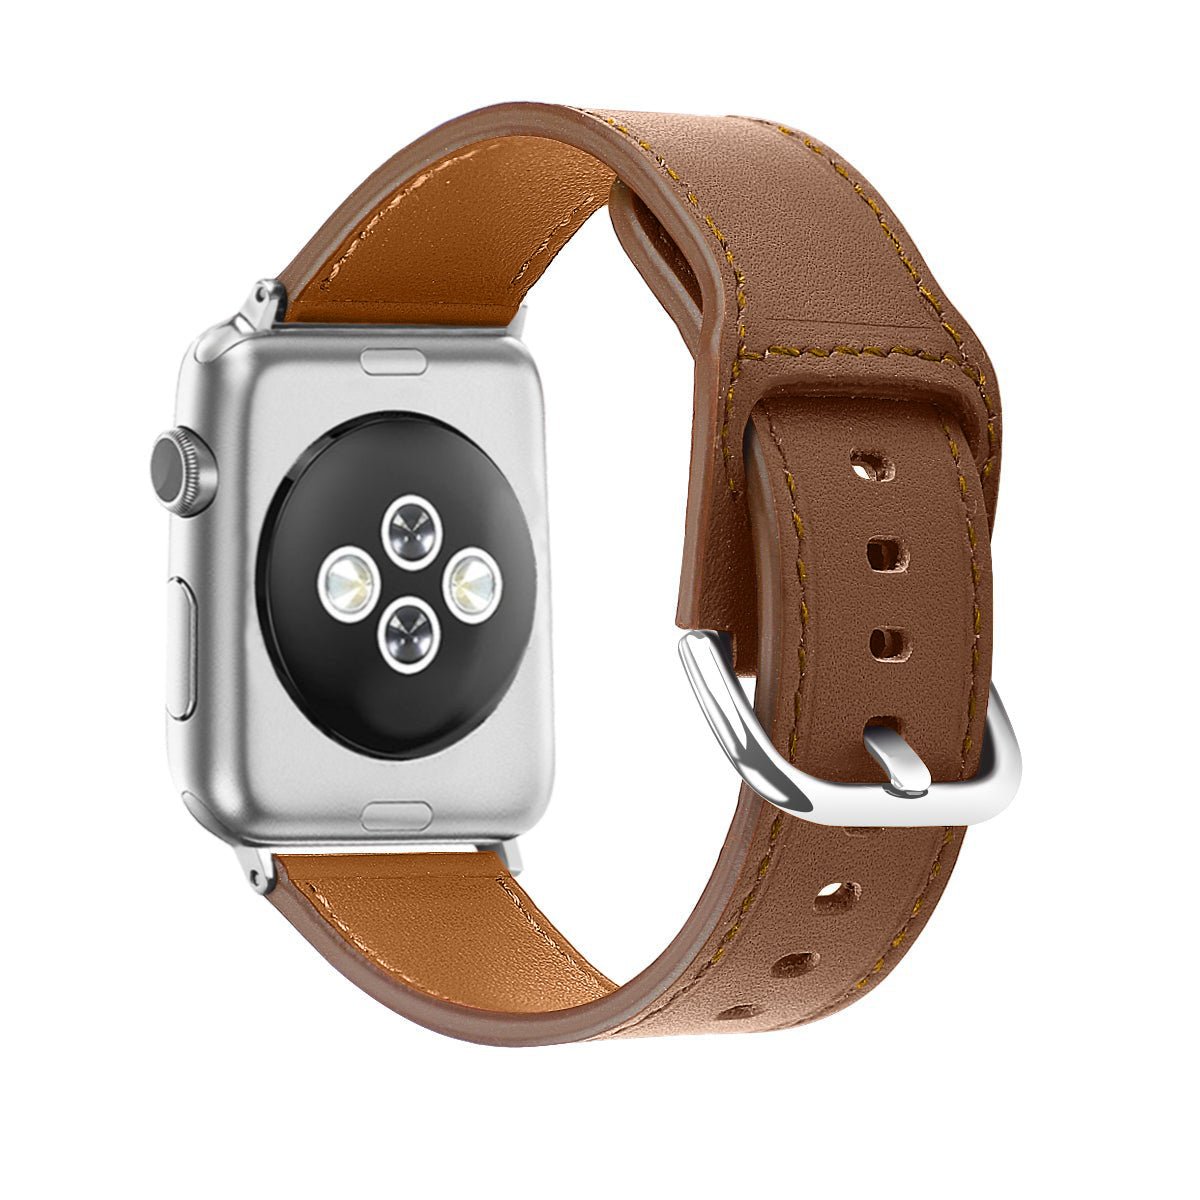 ALK Monaco Leather Band for Apple Watch in Brown - ALK DESIGNS